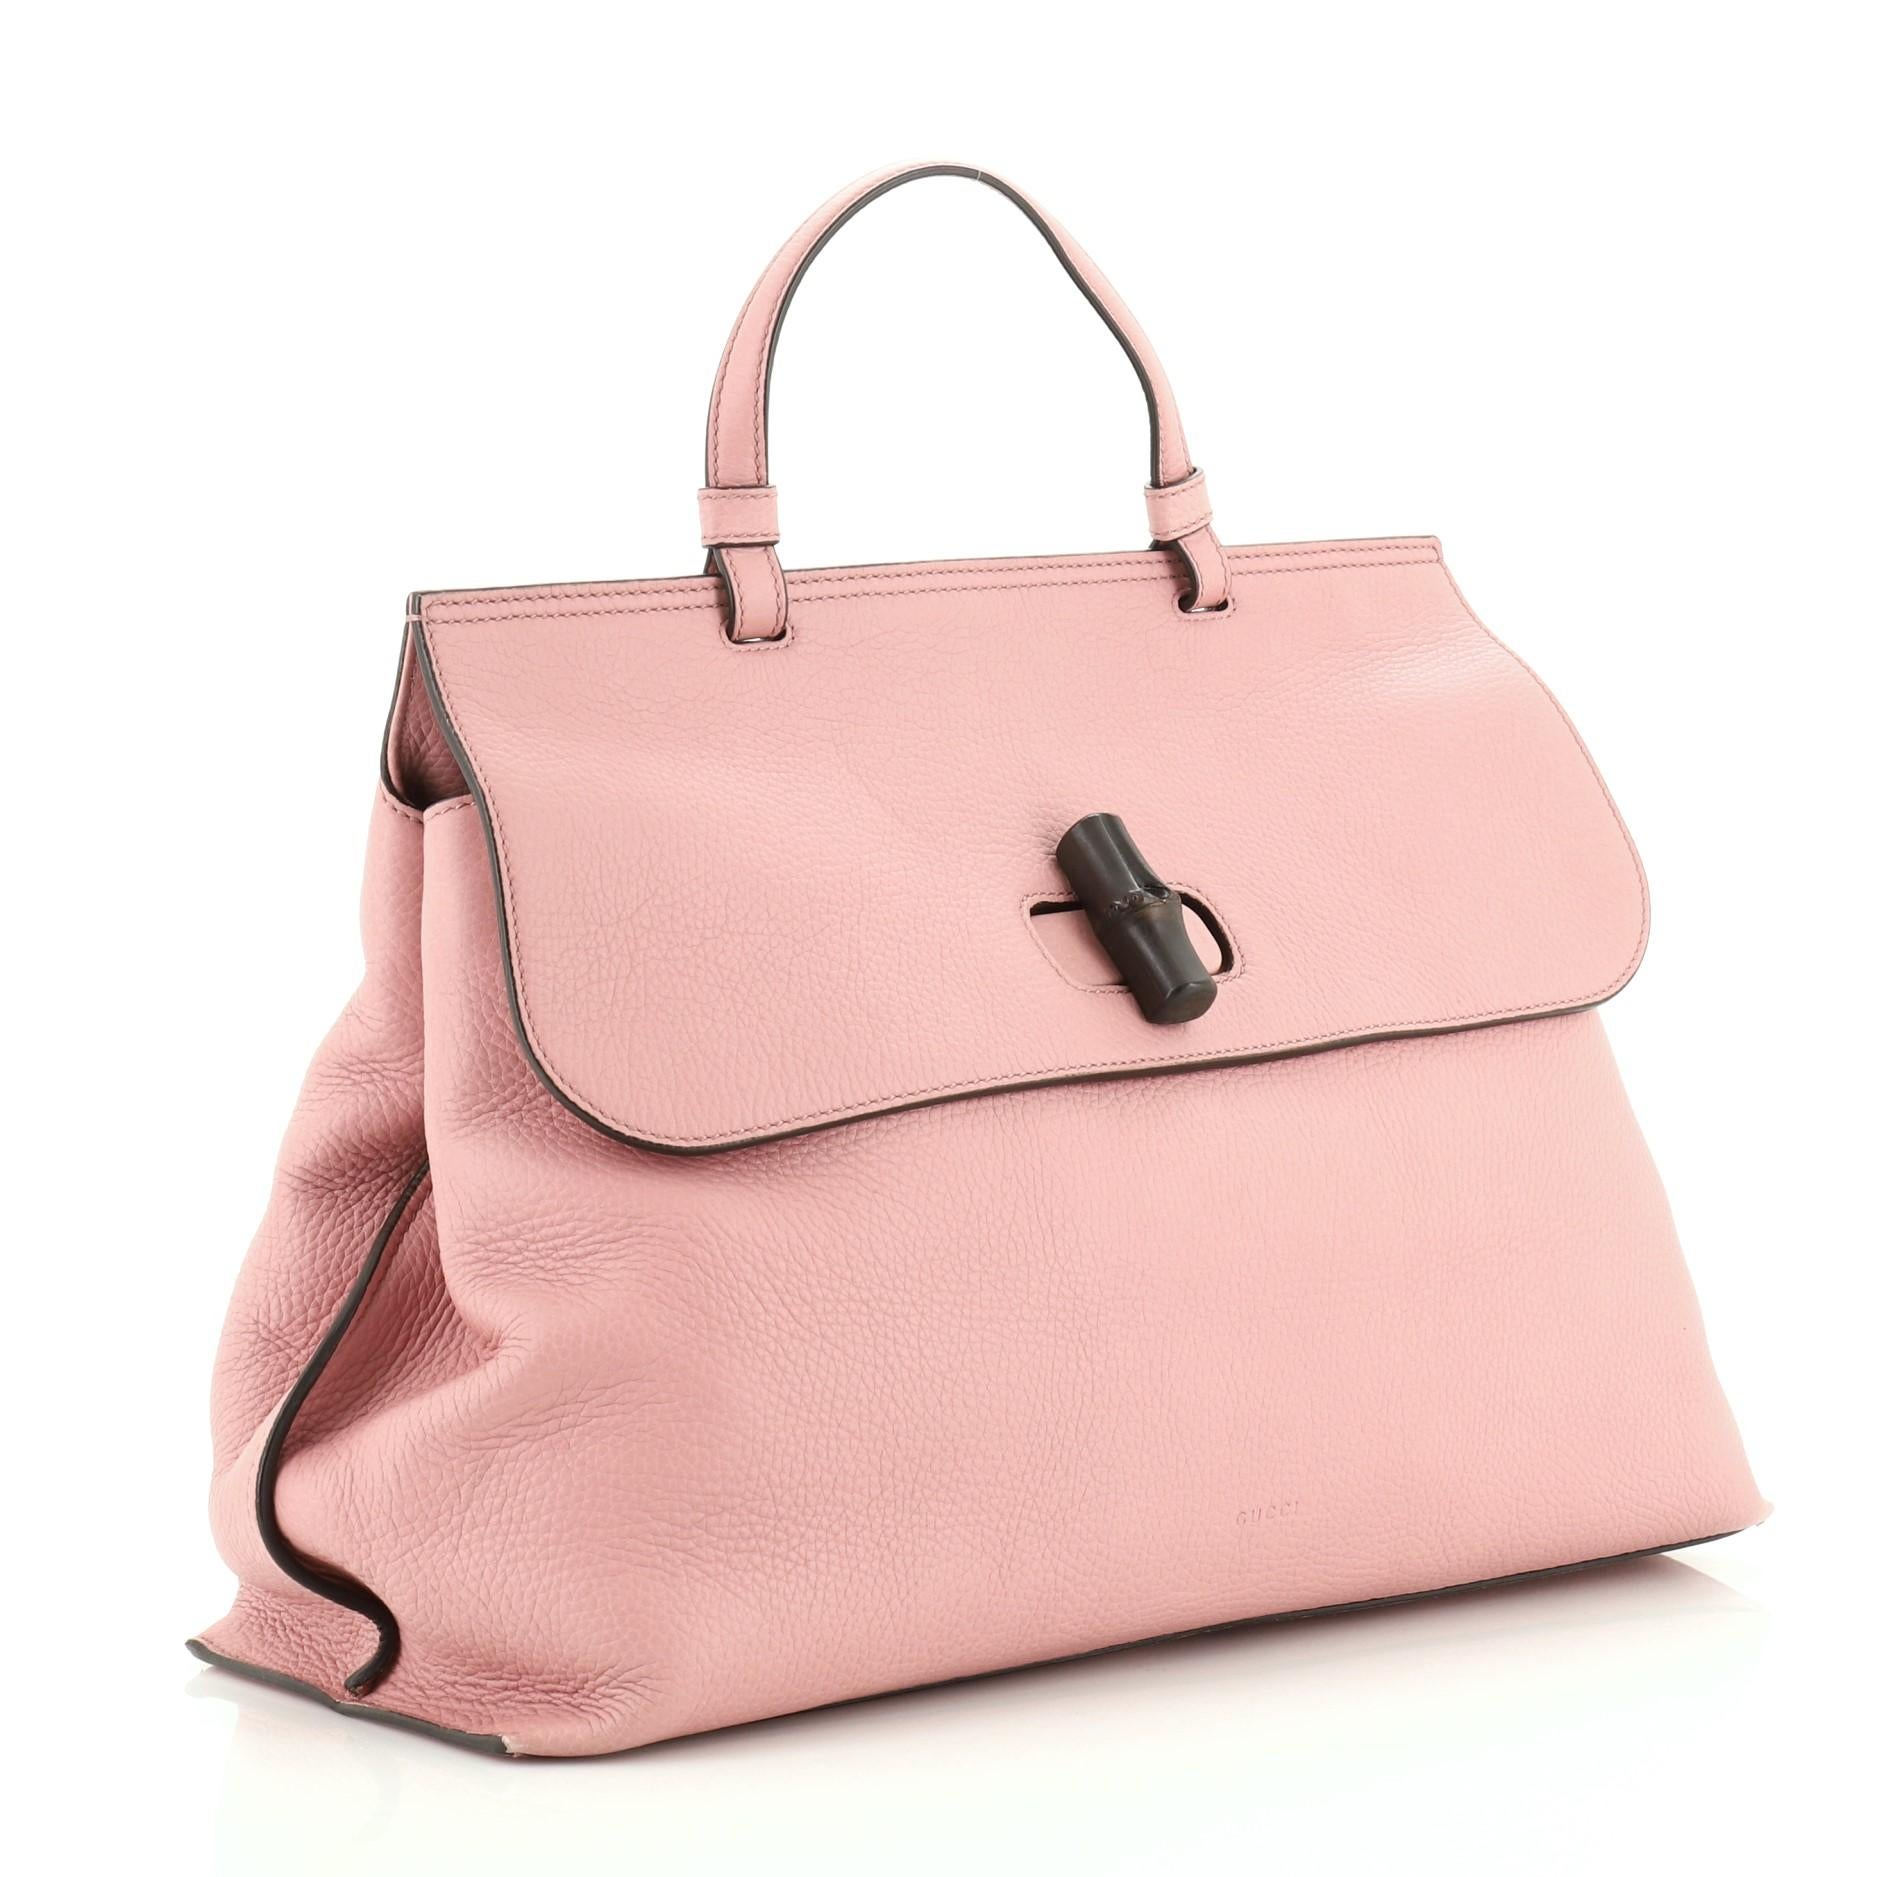 This Gucci Bamboo Daily Top Handle Bag Leather Large, crafted from pink leather, features a flat top handle and silver-tone hardware. Its flap with bamboo turn-lock closure opens to a purple and yellow printed fabric interior with zip and slip